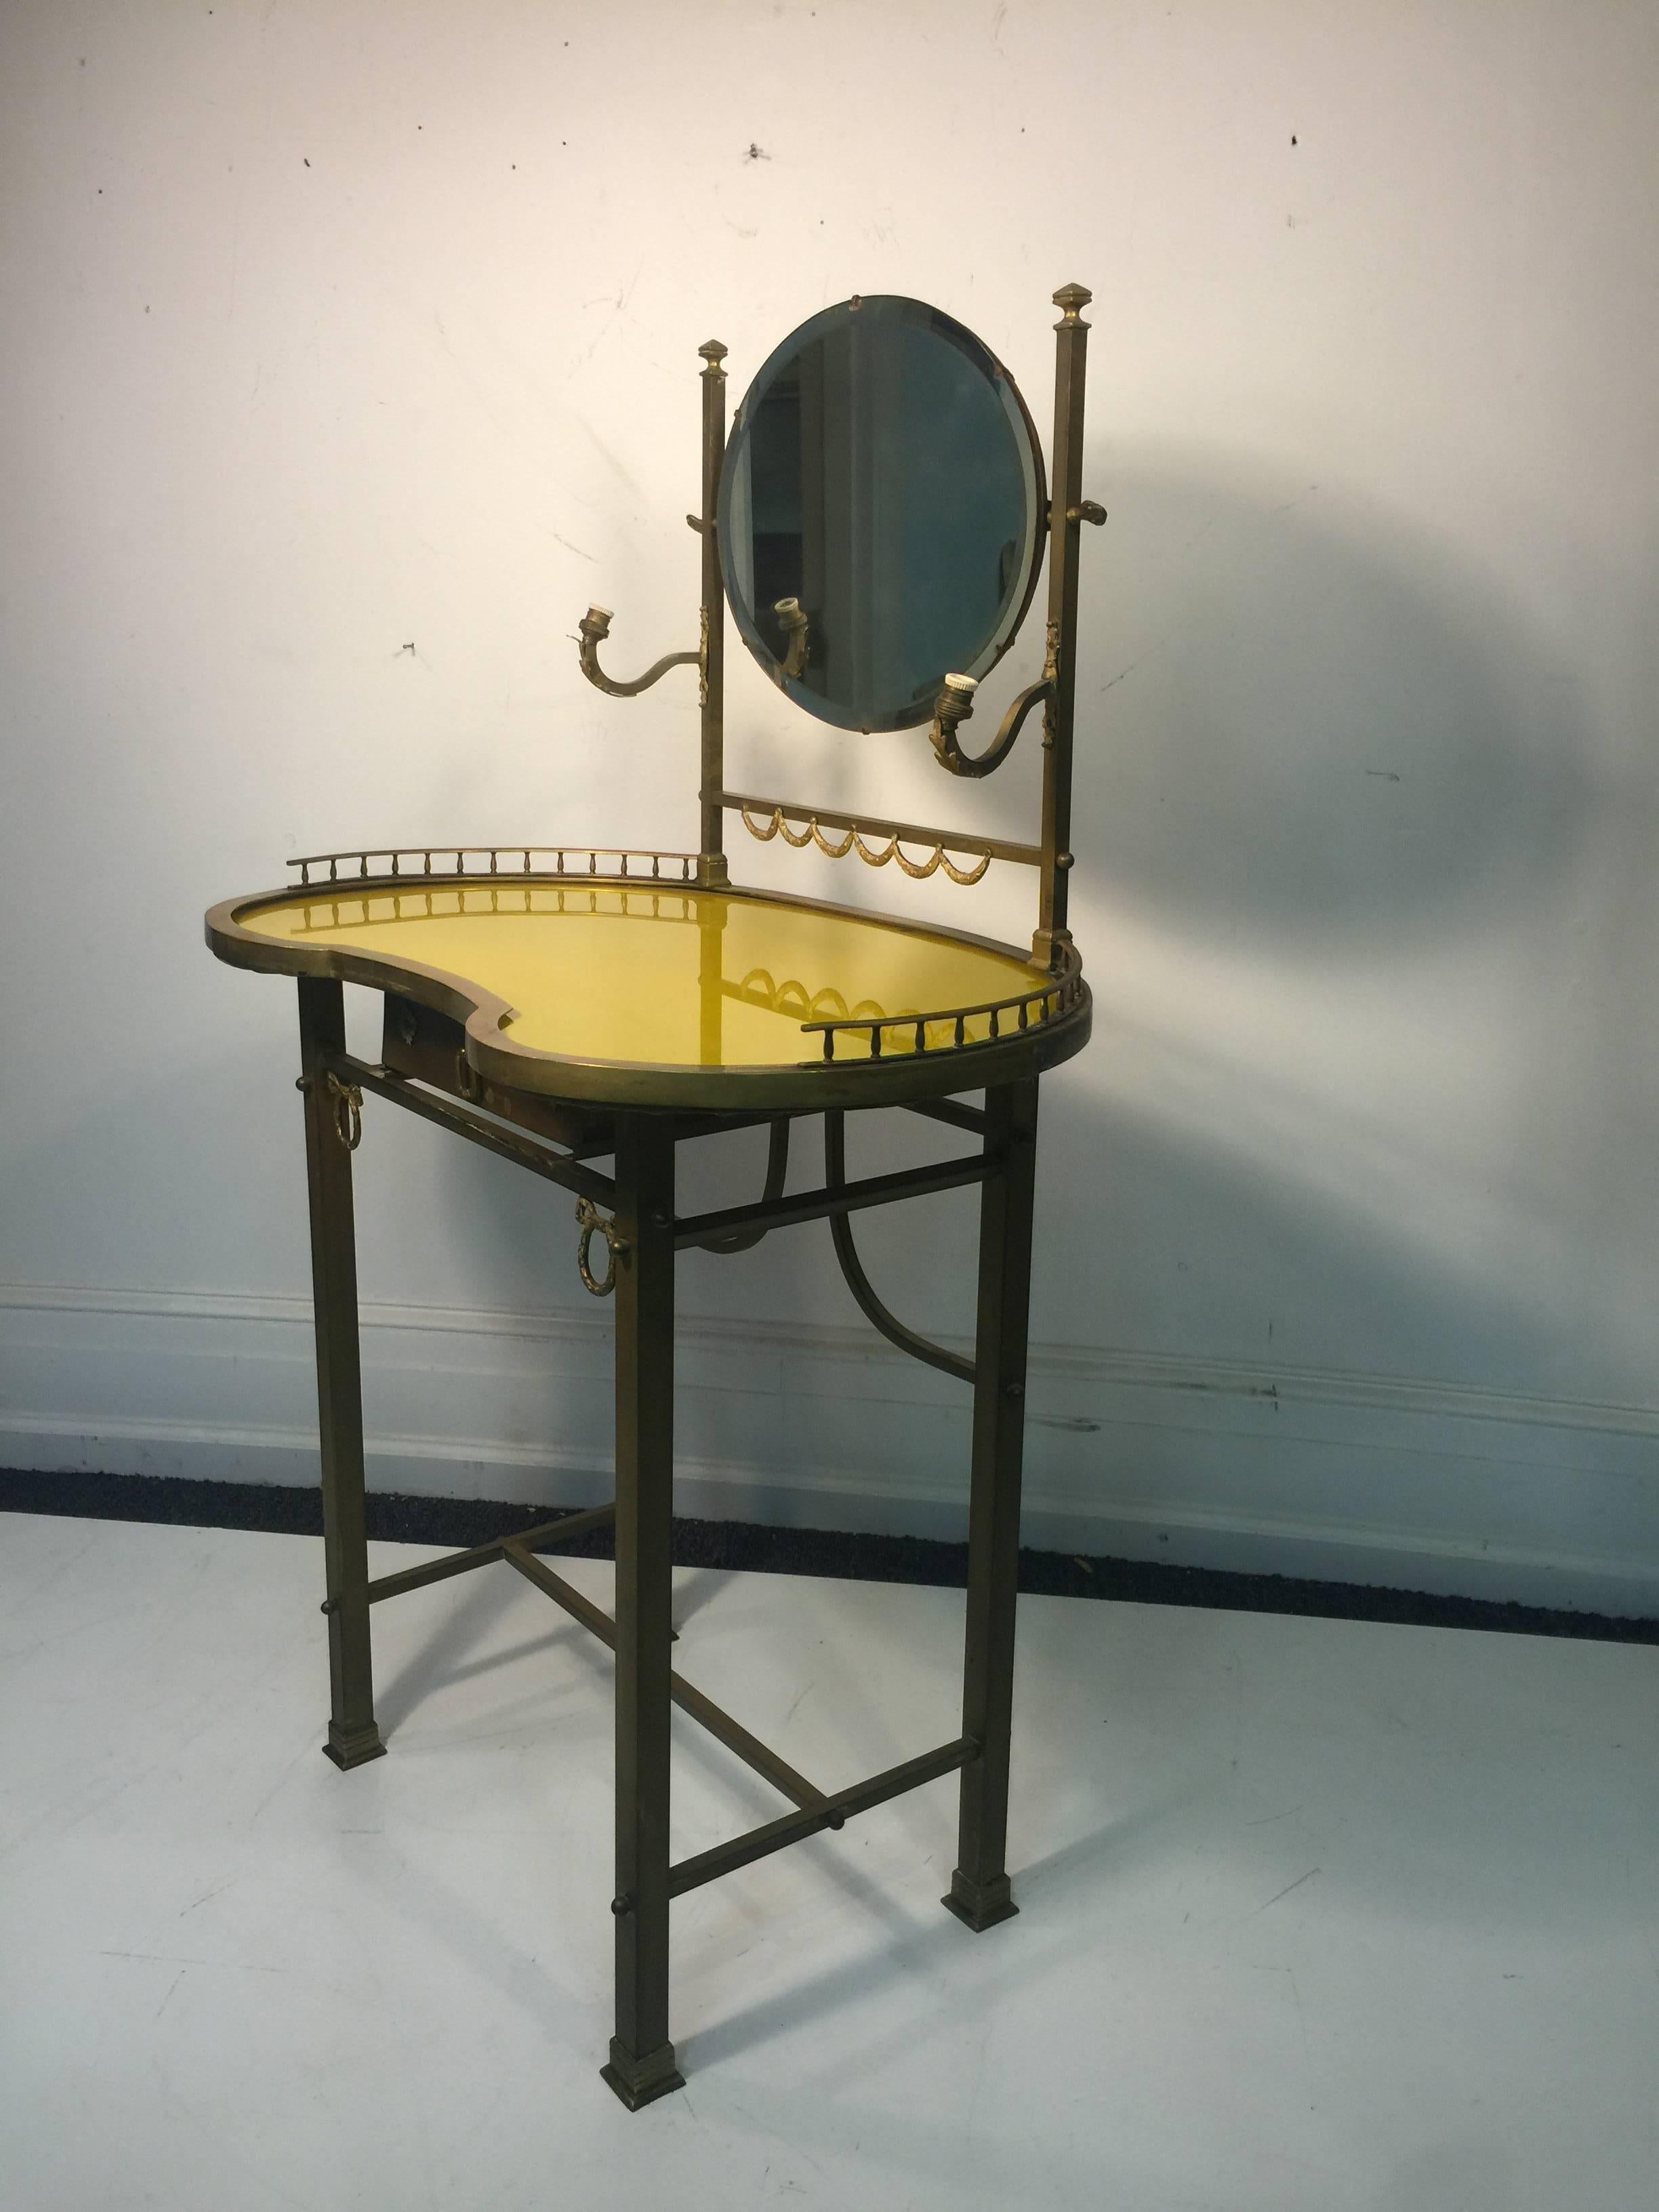 An exquisite 19th century French, bronze vanity with hand-painted yellow glass top and brass accents. Highly decorative with great attention to detail. Good condition with age appropriate wear.